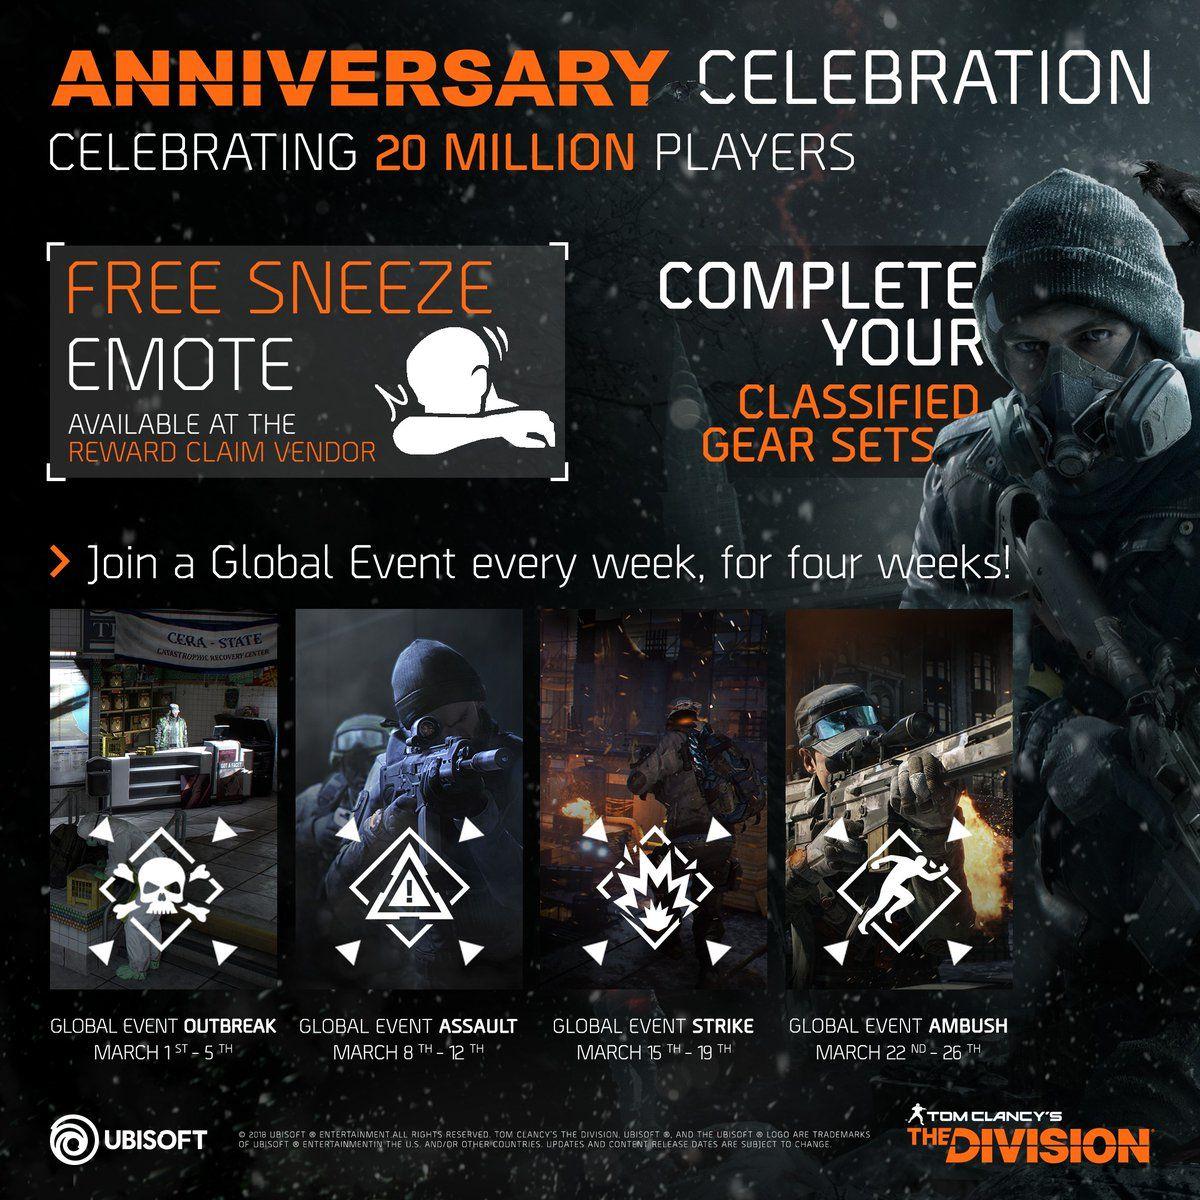 The Division Ubisoft Logo - The Division - Anniversary Celebration - 4 Global Events in 4 weeks ...